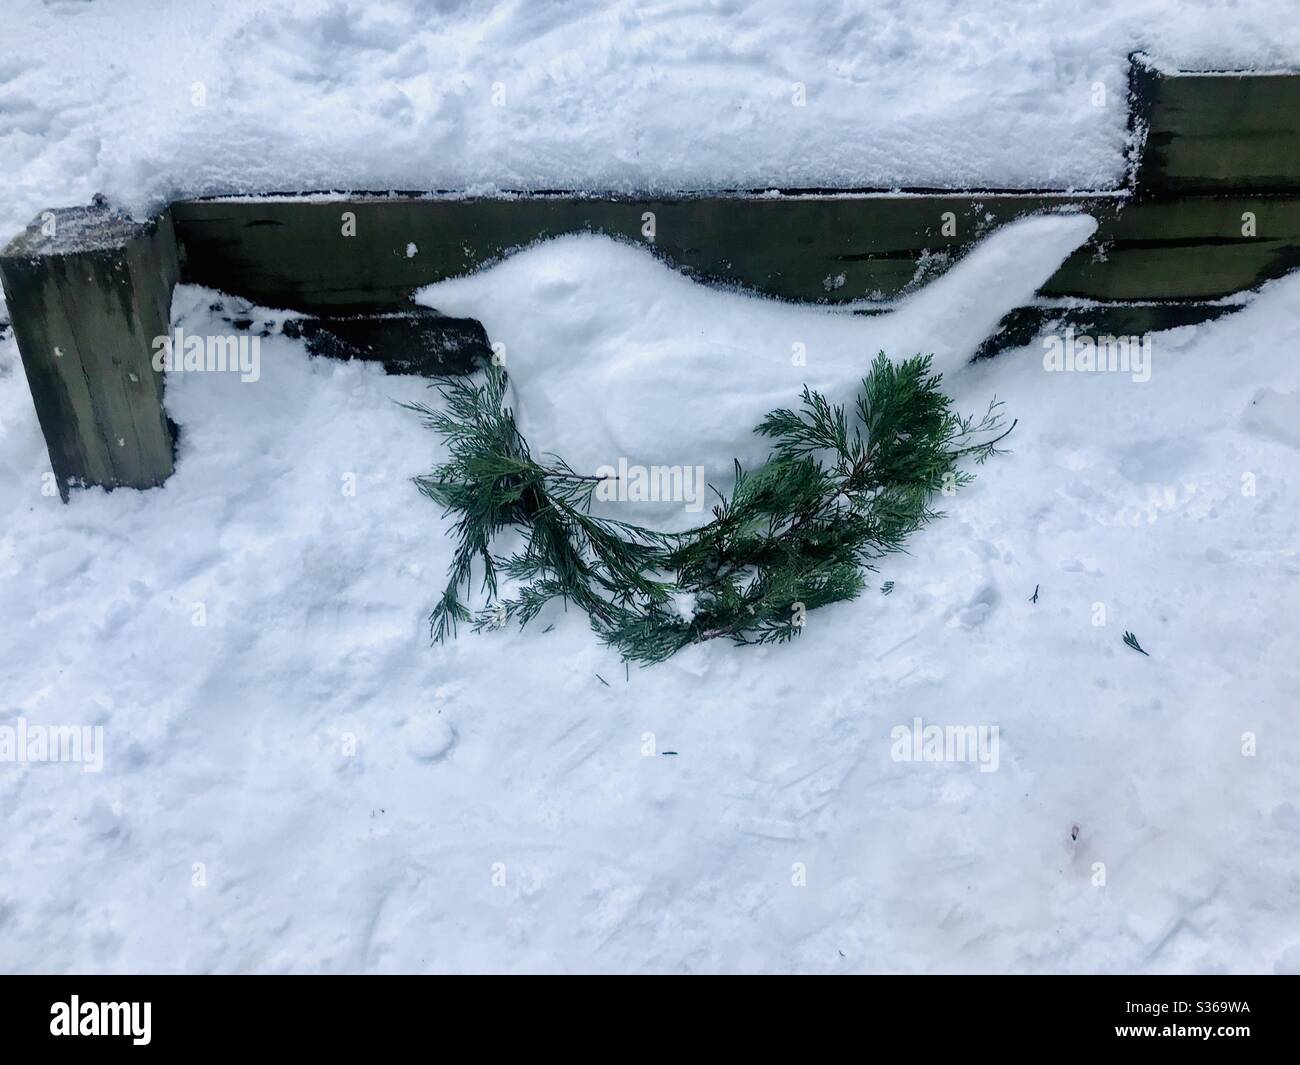 A snow creation of a nesting bird with pine branches surrounding it. Stock Photo